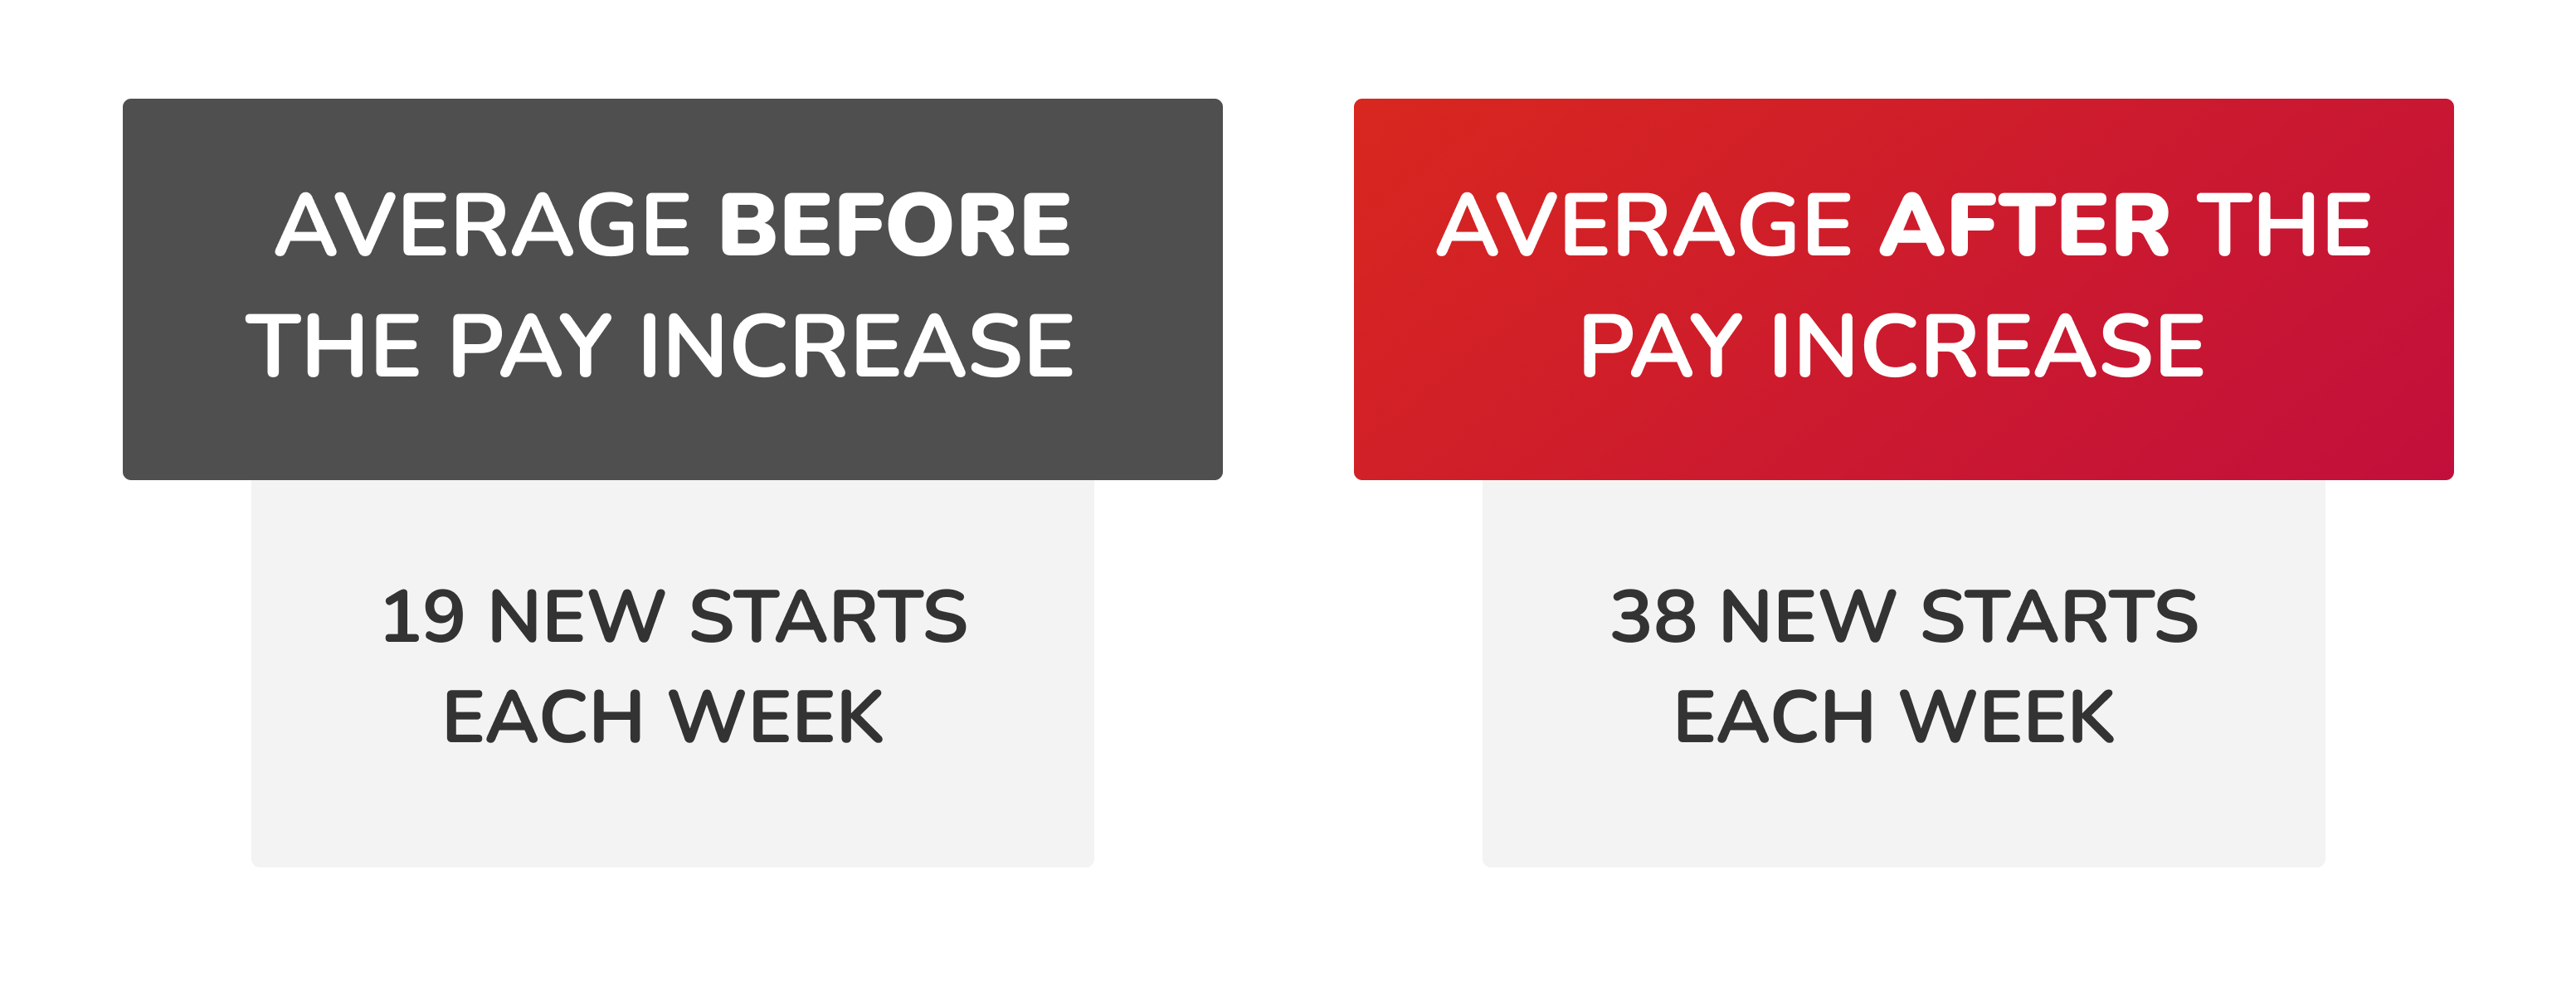 Average before the pay increase: 19 New starts each week. Average after the pay increase: 38 New starts each week